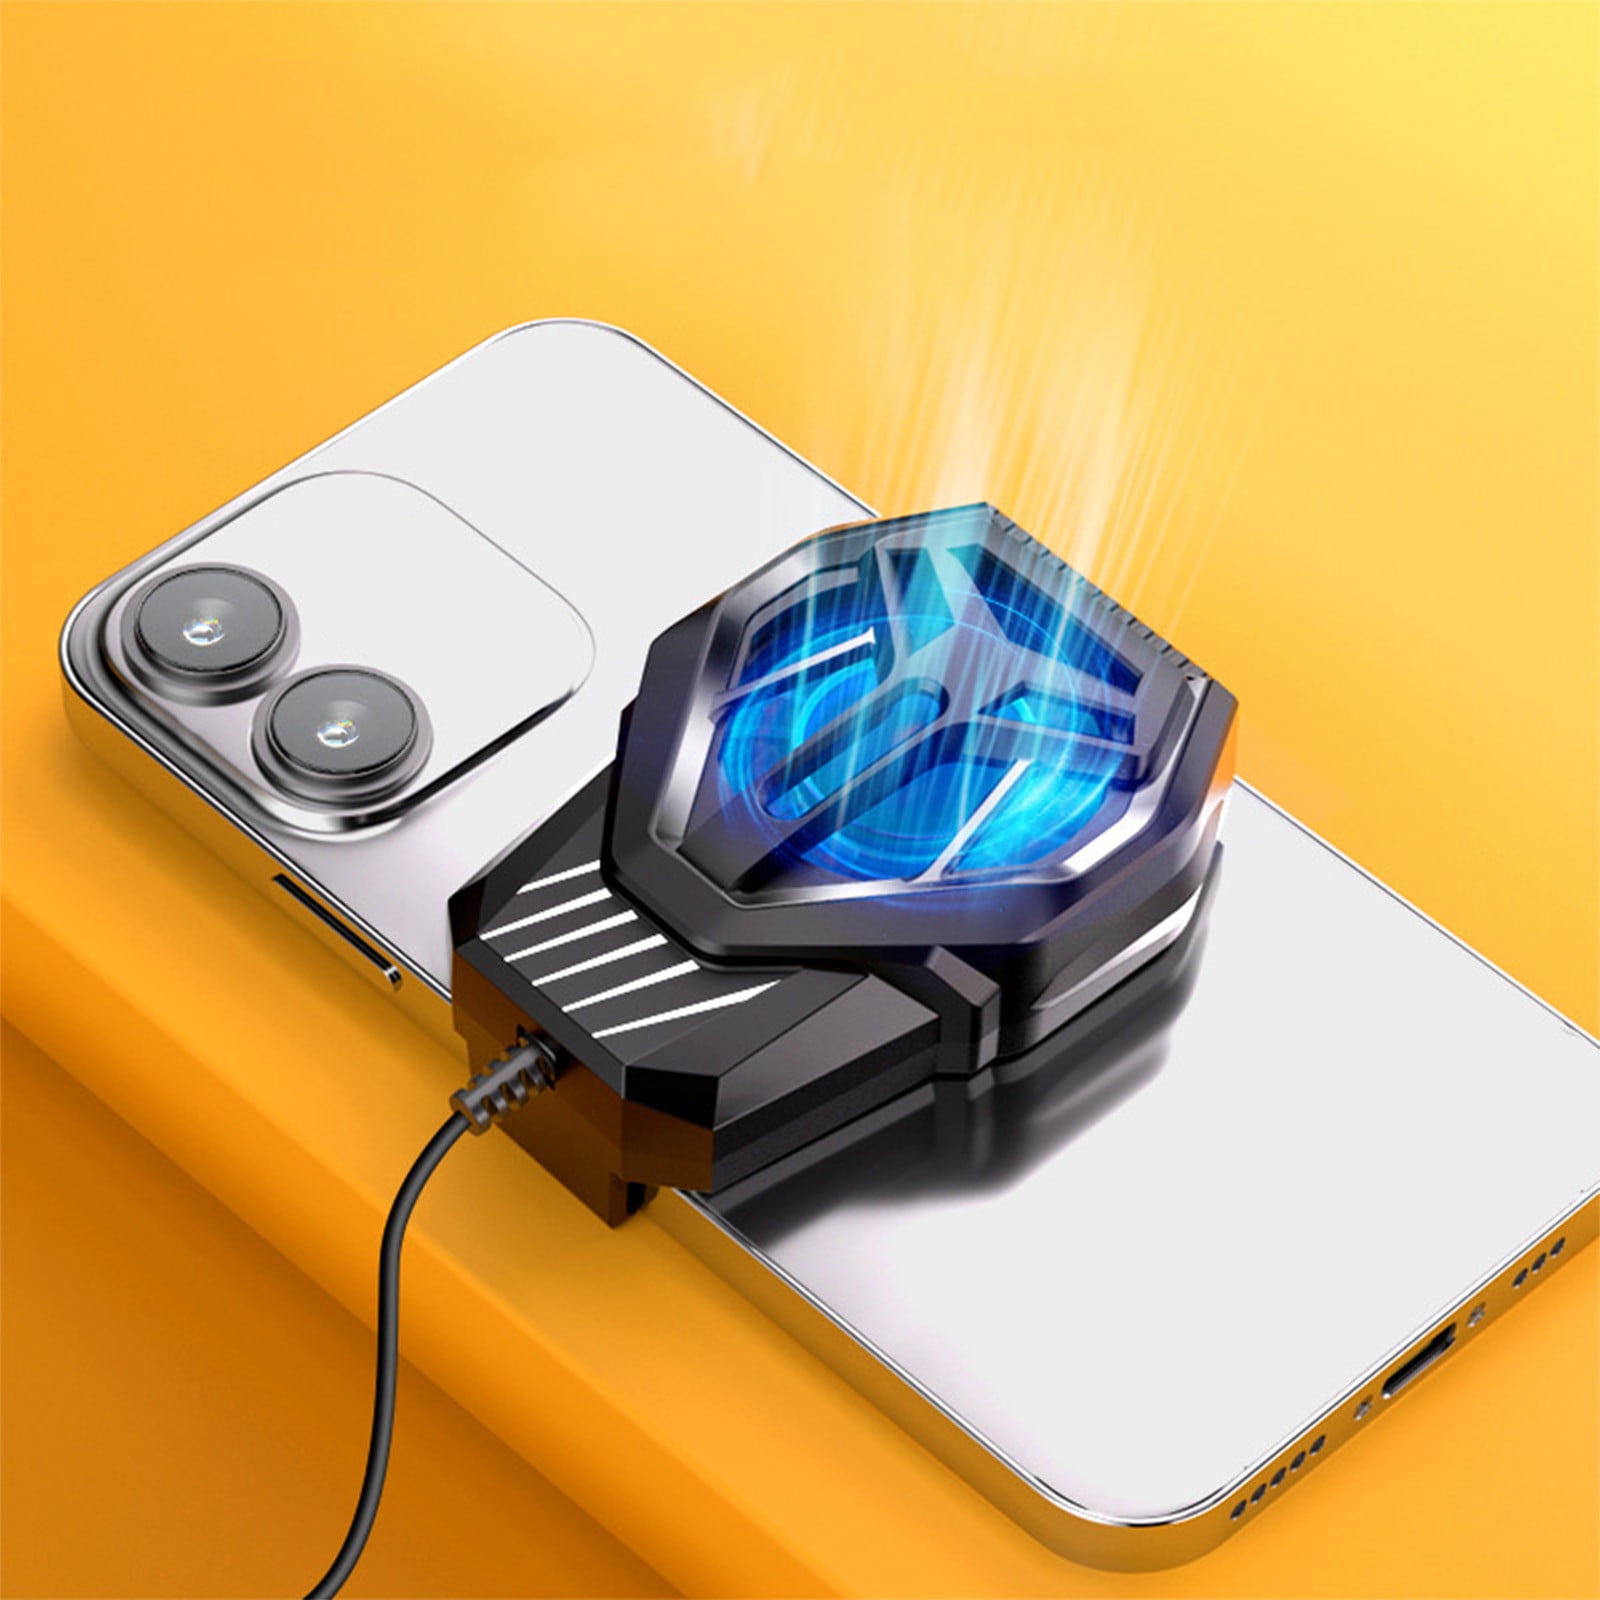 Yyeselk Phone Cooler with Rechargeable Phone Cooling Gaming Fit All Types of iPhone Android Smartphones, Mobile Phone Universal Clamp/RGB LEDS - Walmart.com